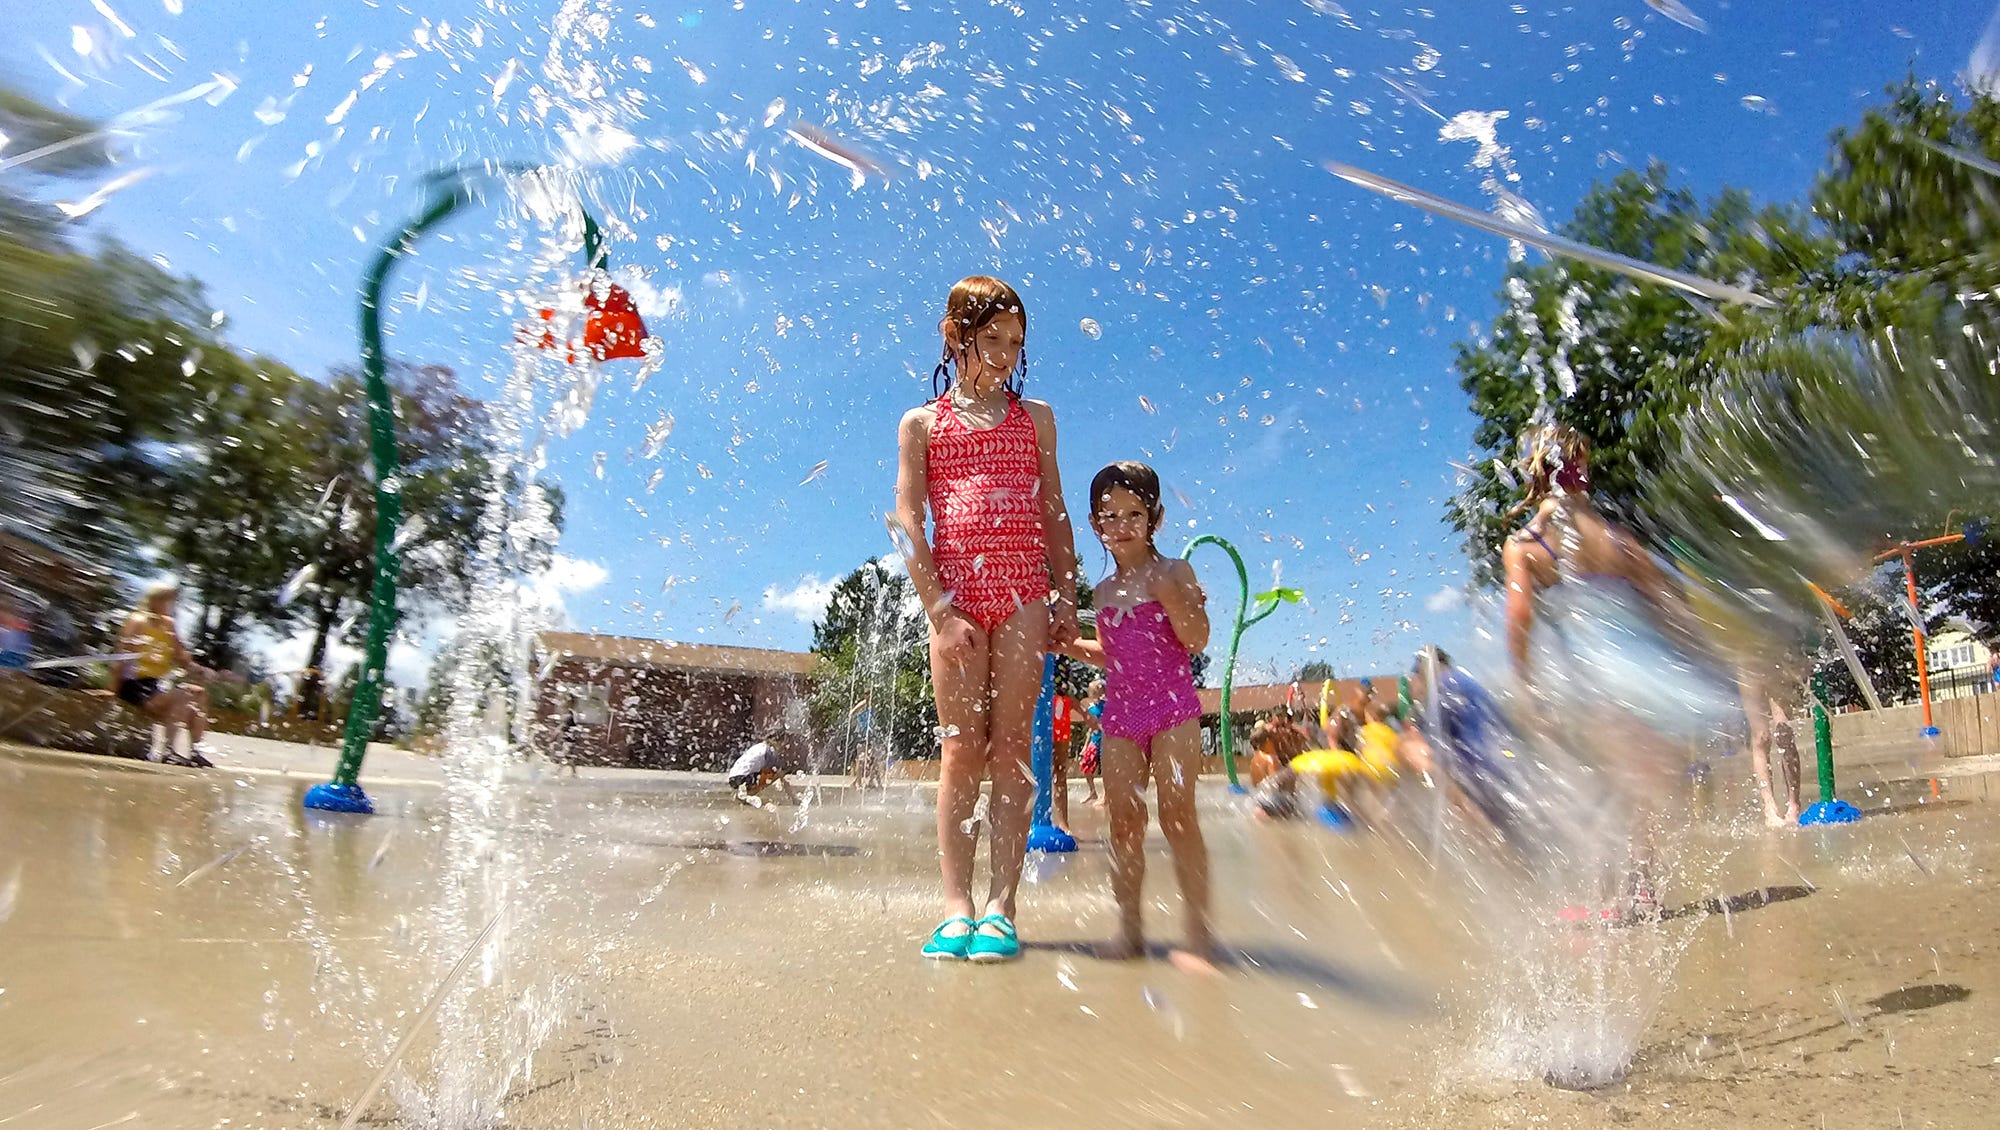 Clare Seifert, 8, left, and her sister Elise, 2, of Emigsville, stand in a spray of water at the Splash Pad in Red Lion, Friday, Aug. 12, 2016. John A. Pavoncello photo